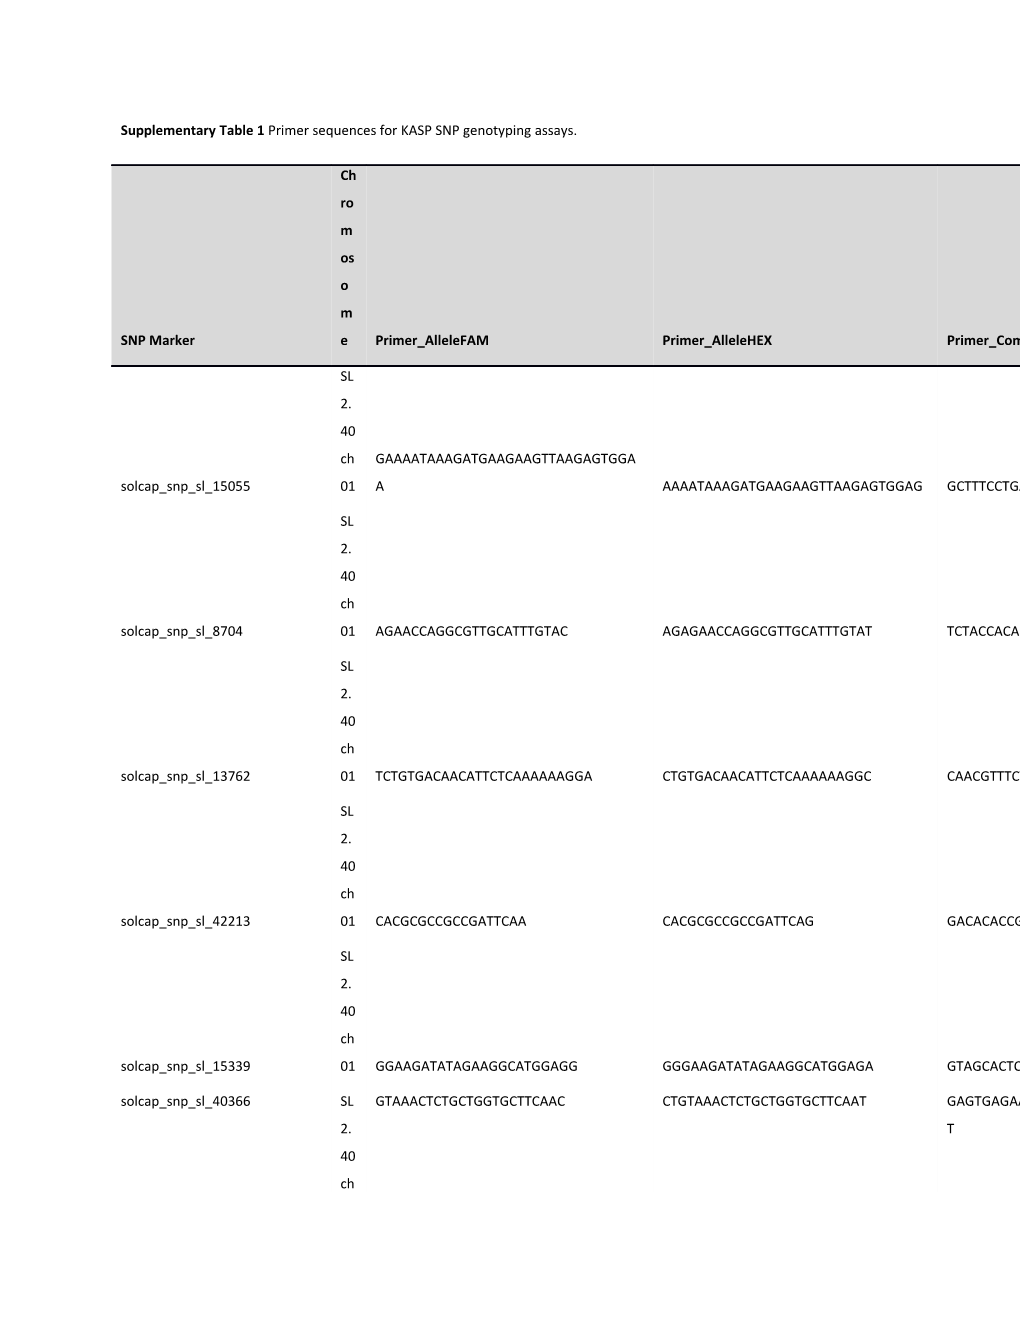 Supplementary Table 1 Primer Sequences for KASP SNP Genotyping Assays